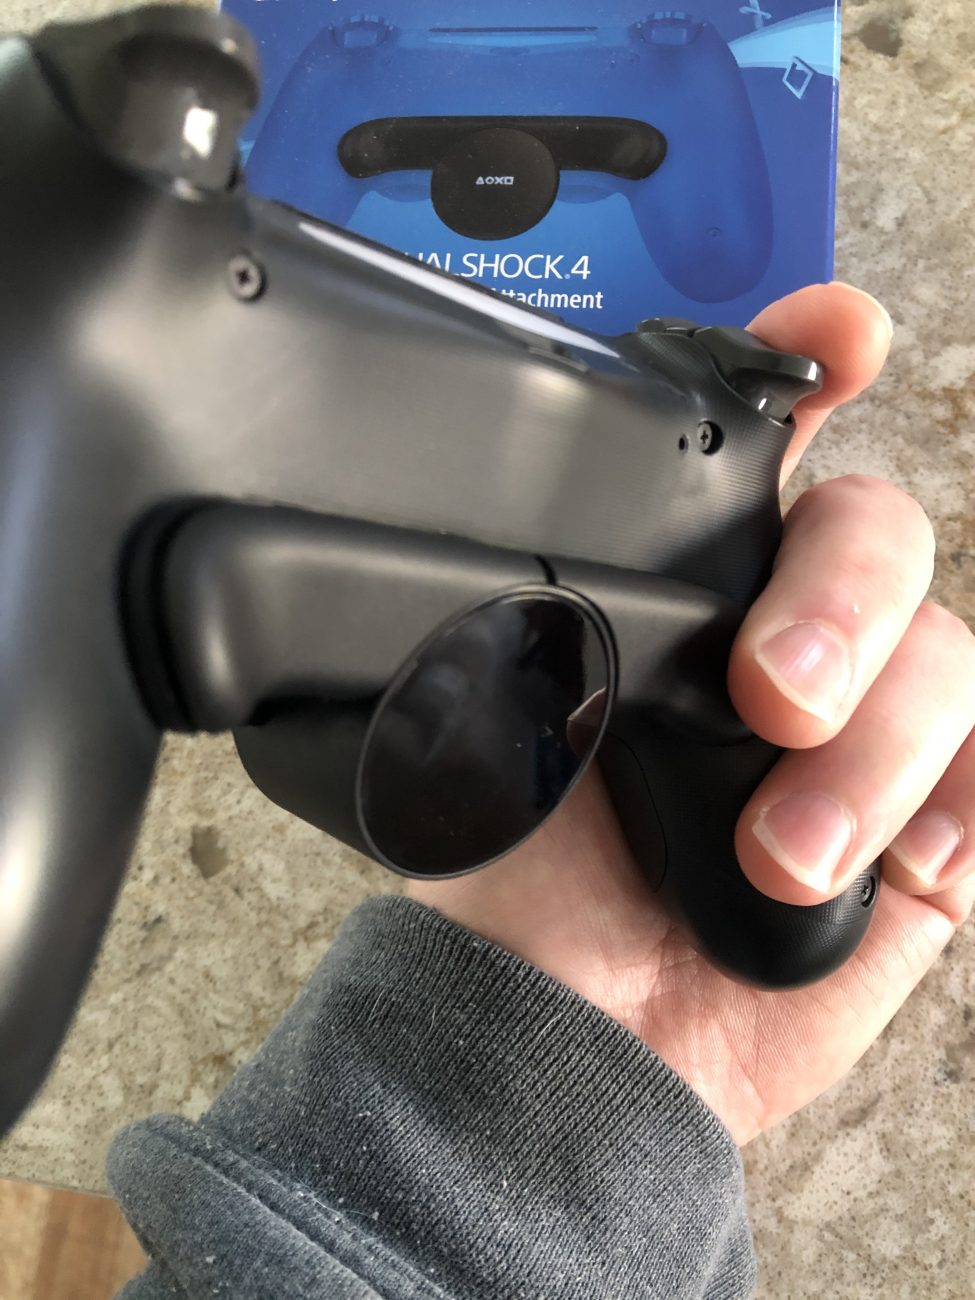 DualShock 4 Back Button Attachment, PS4, PlayStation